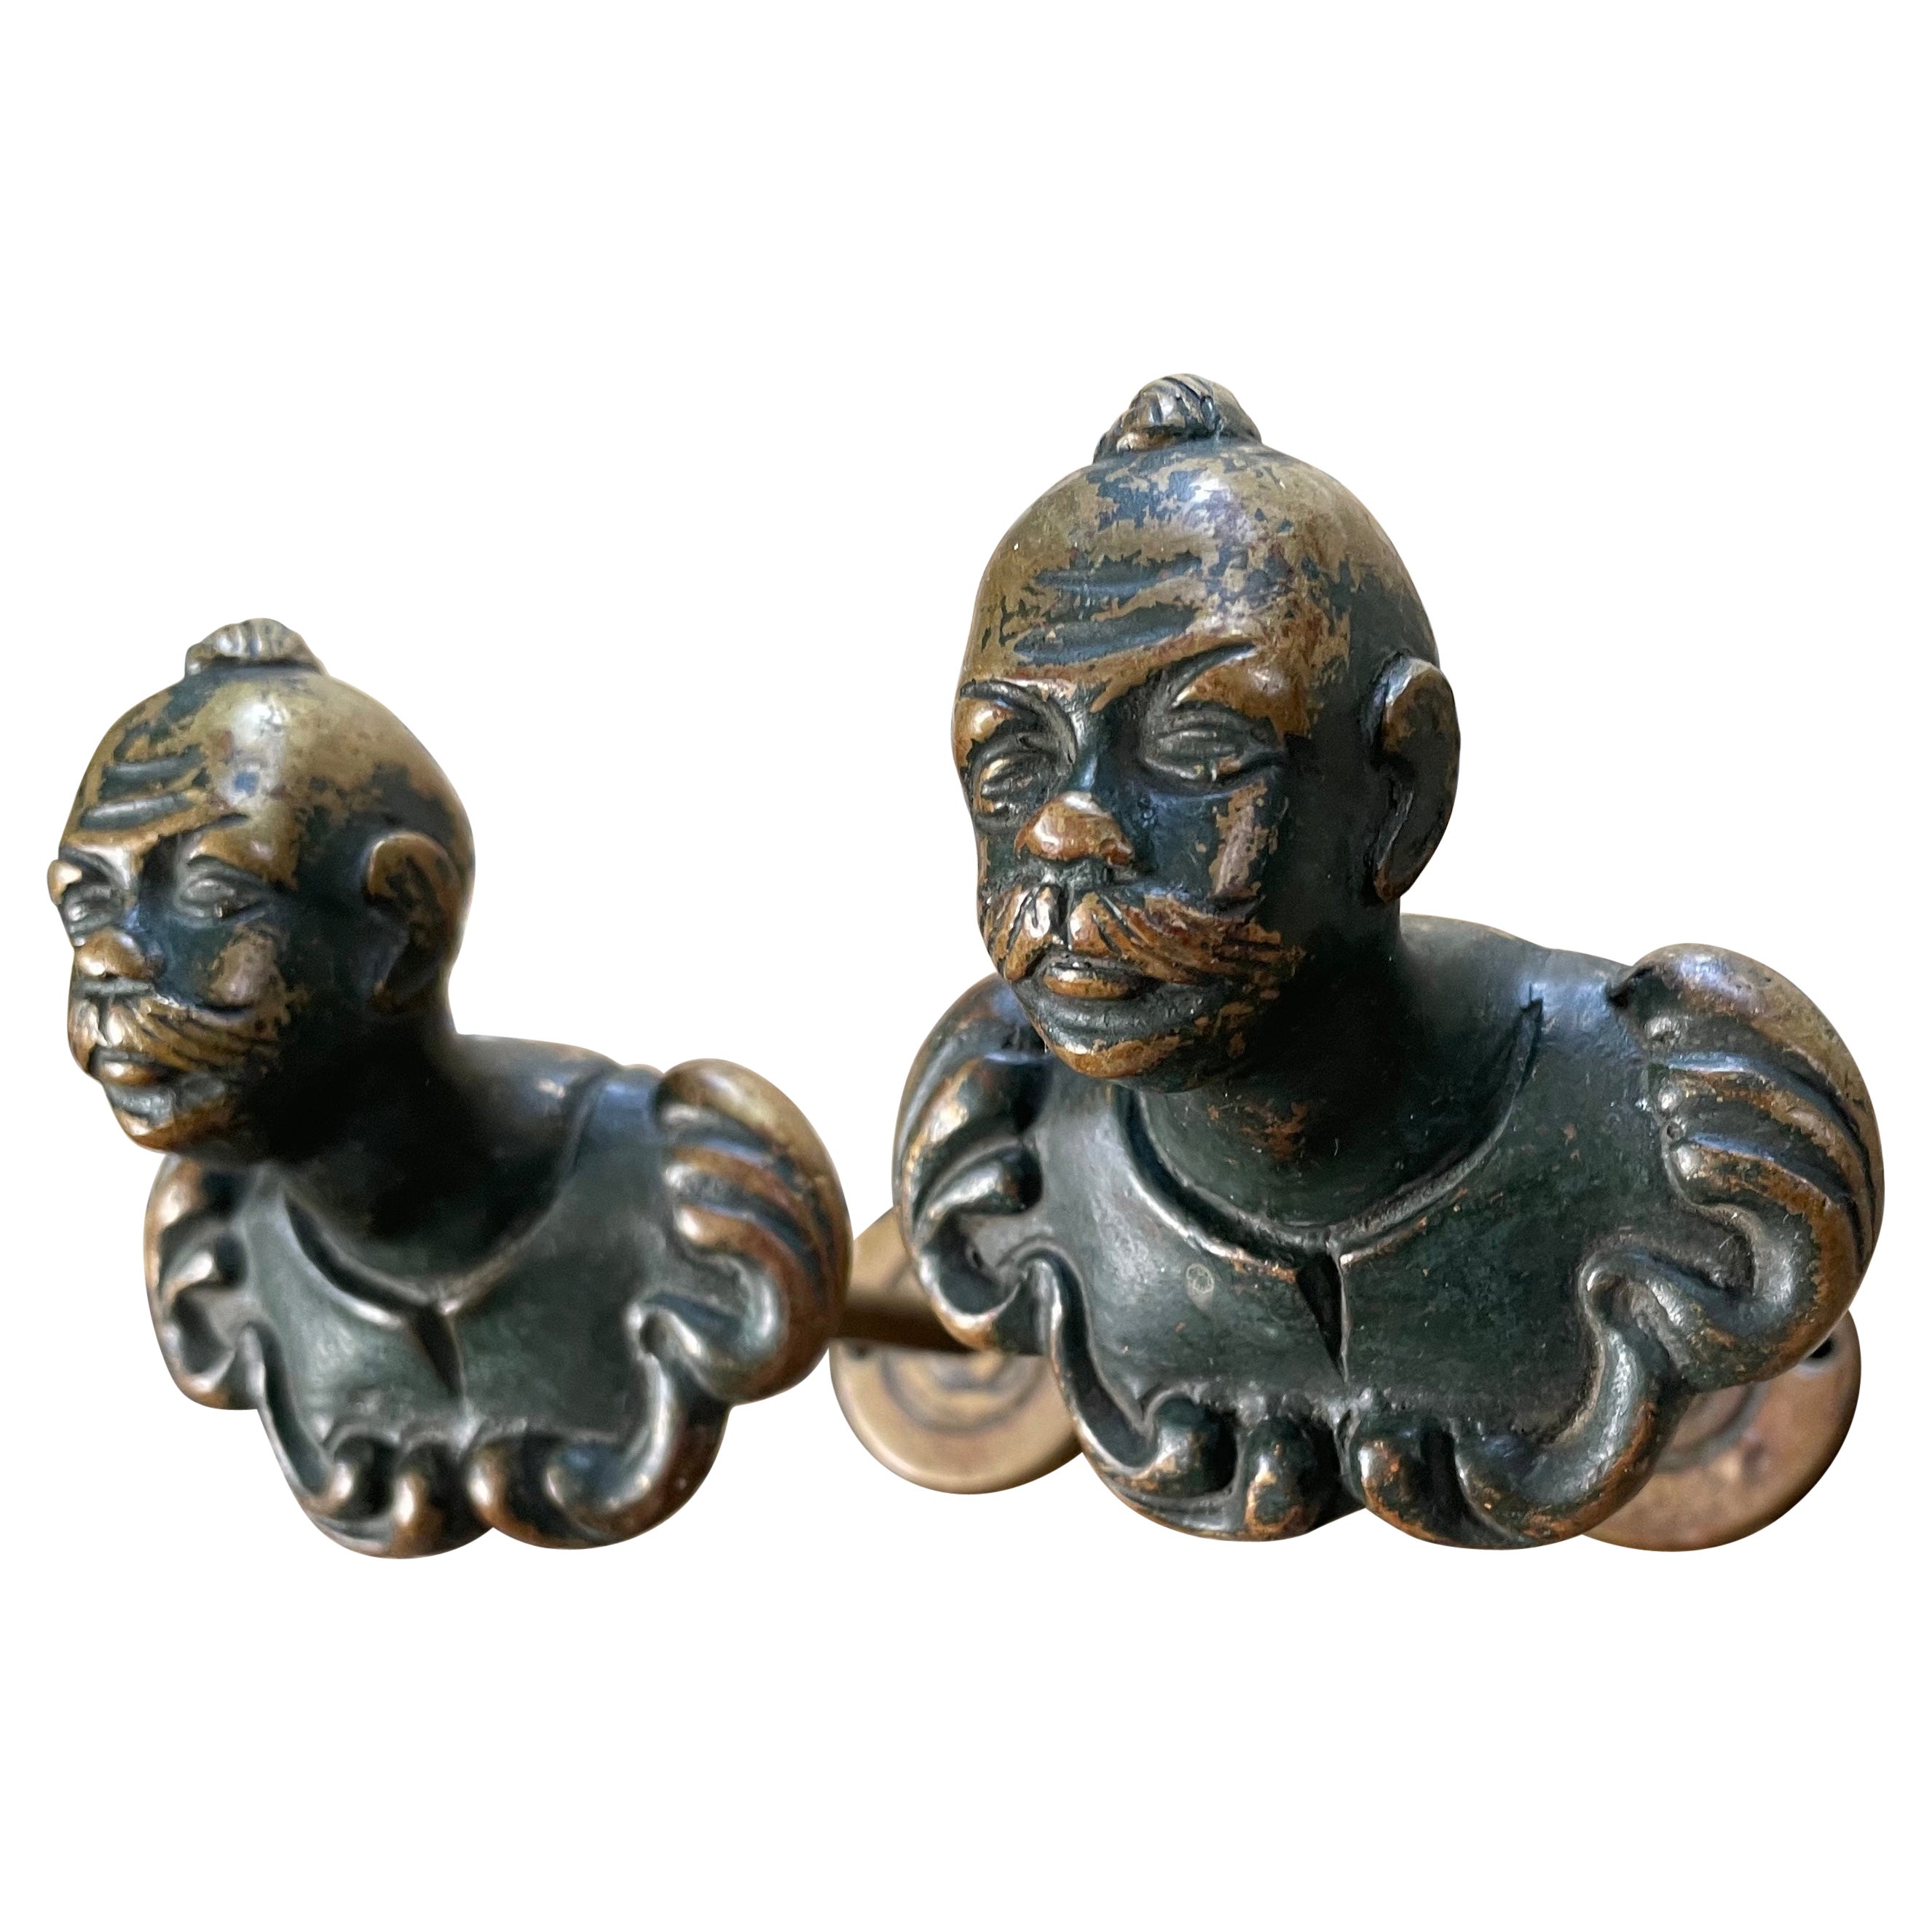 Pair Venetian Turkomen tie backs. Pair vintage bronze cast tie backs in venetian chinoiserie style. United States, late 19th century. 
Dimensions: 3.25” W x 6” Deep x 3.25” H; 3.75” stem space for curtains.